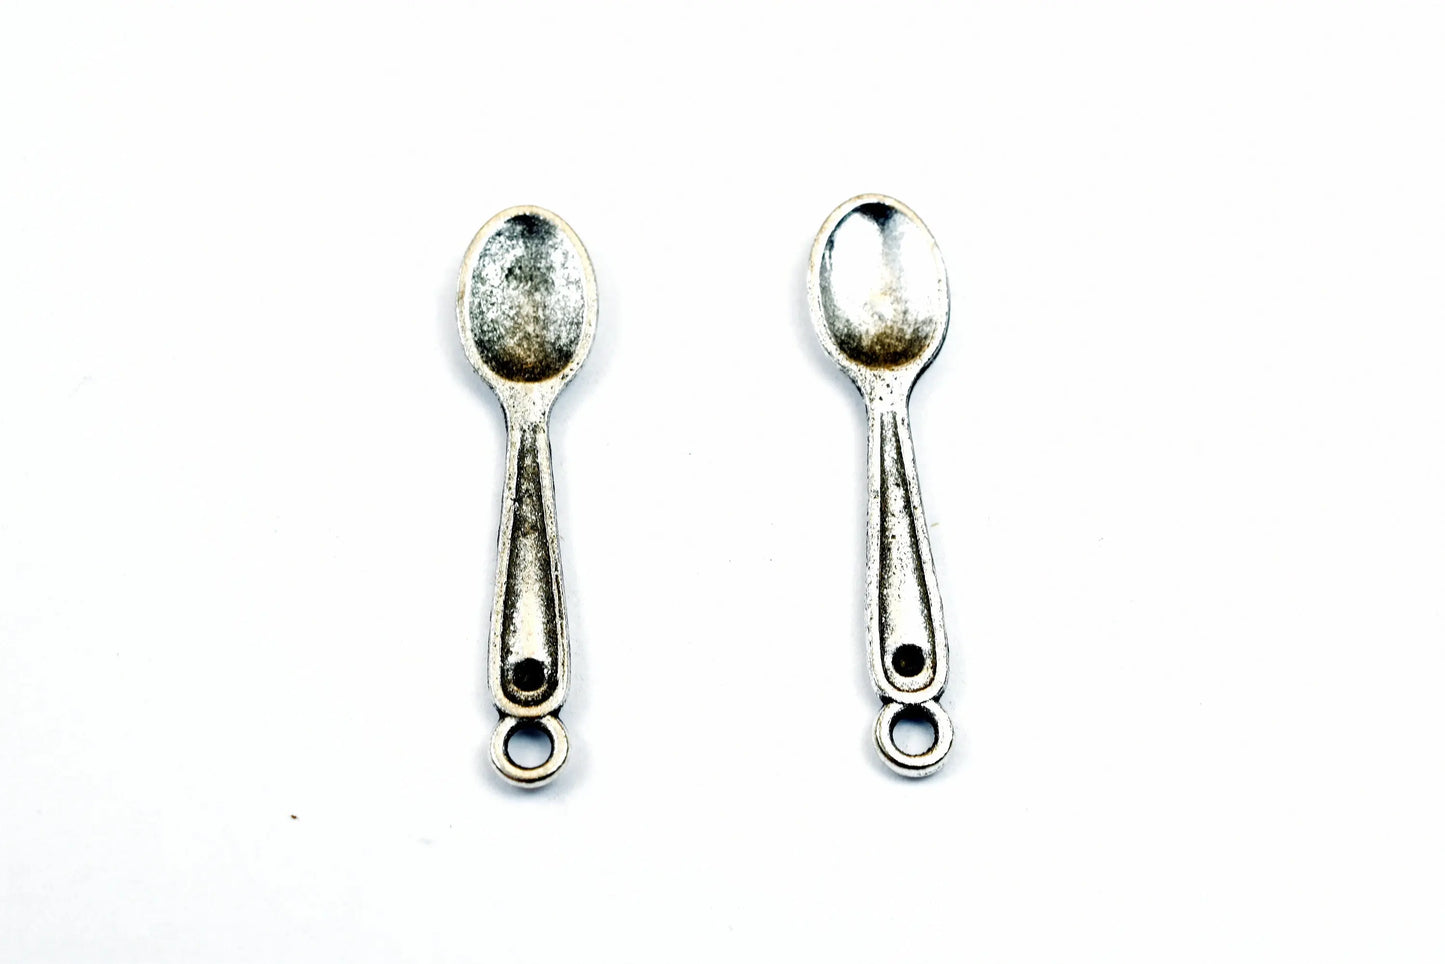 Fork or Spoon Charm Sizes 27x6mm, 25x6mm Silver Color Zinc Alloy Kitchen Charm Pendant Finding For Jewelry Making - BeadsFindingDepot